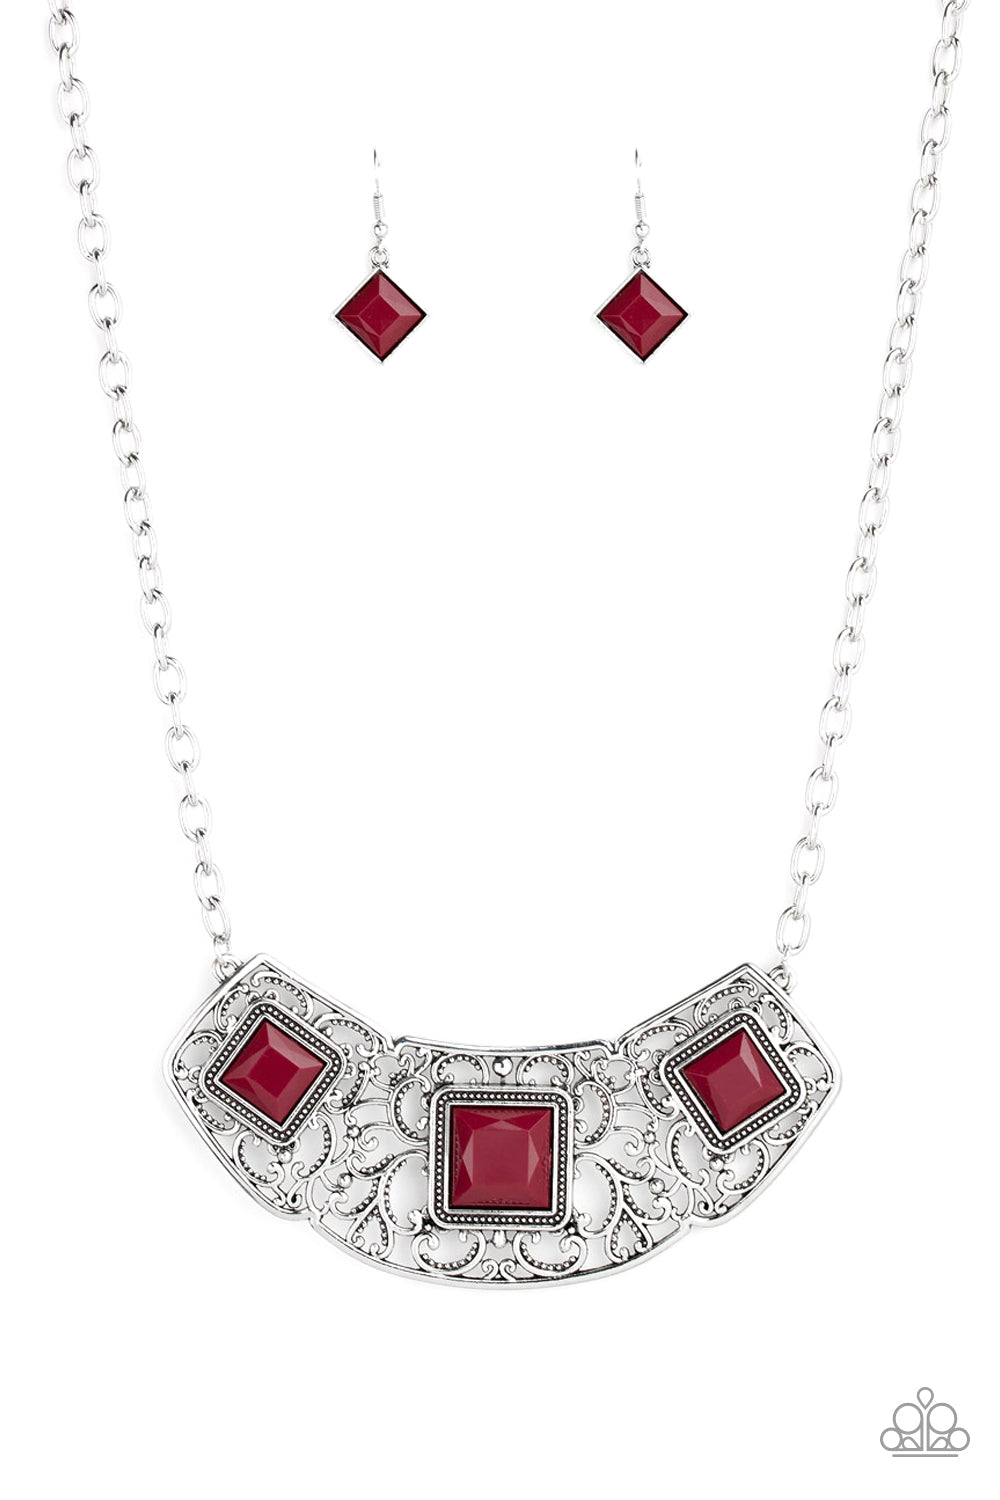 Feeling Inde-PENDANT - Paparazzi - Red Bead Silver Filigree Necklace